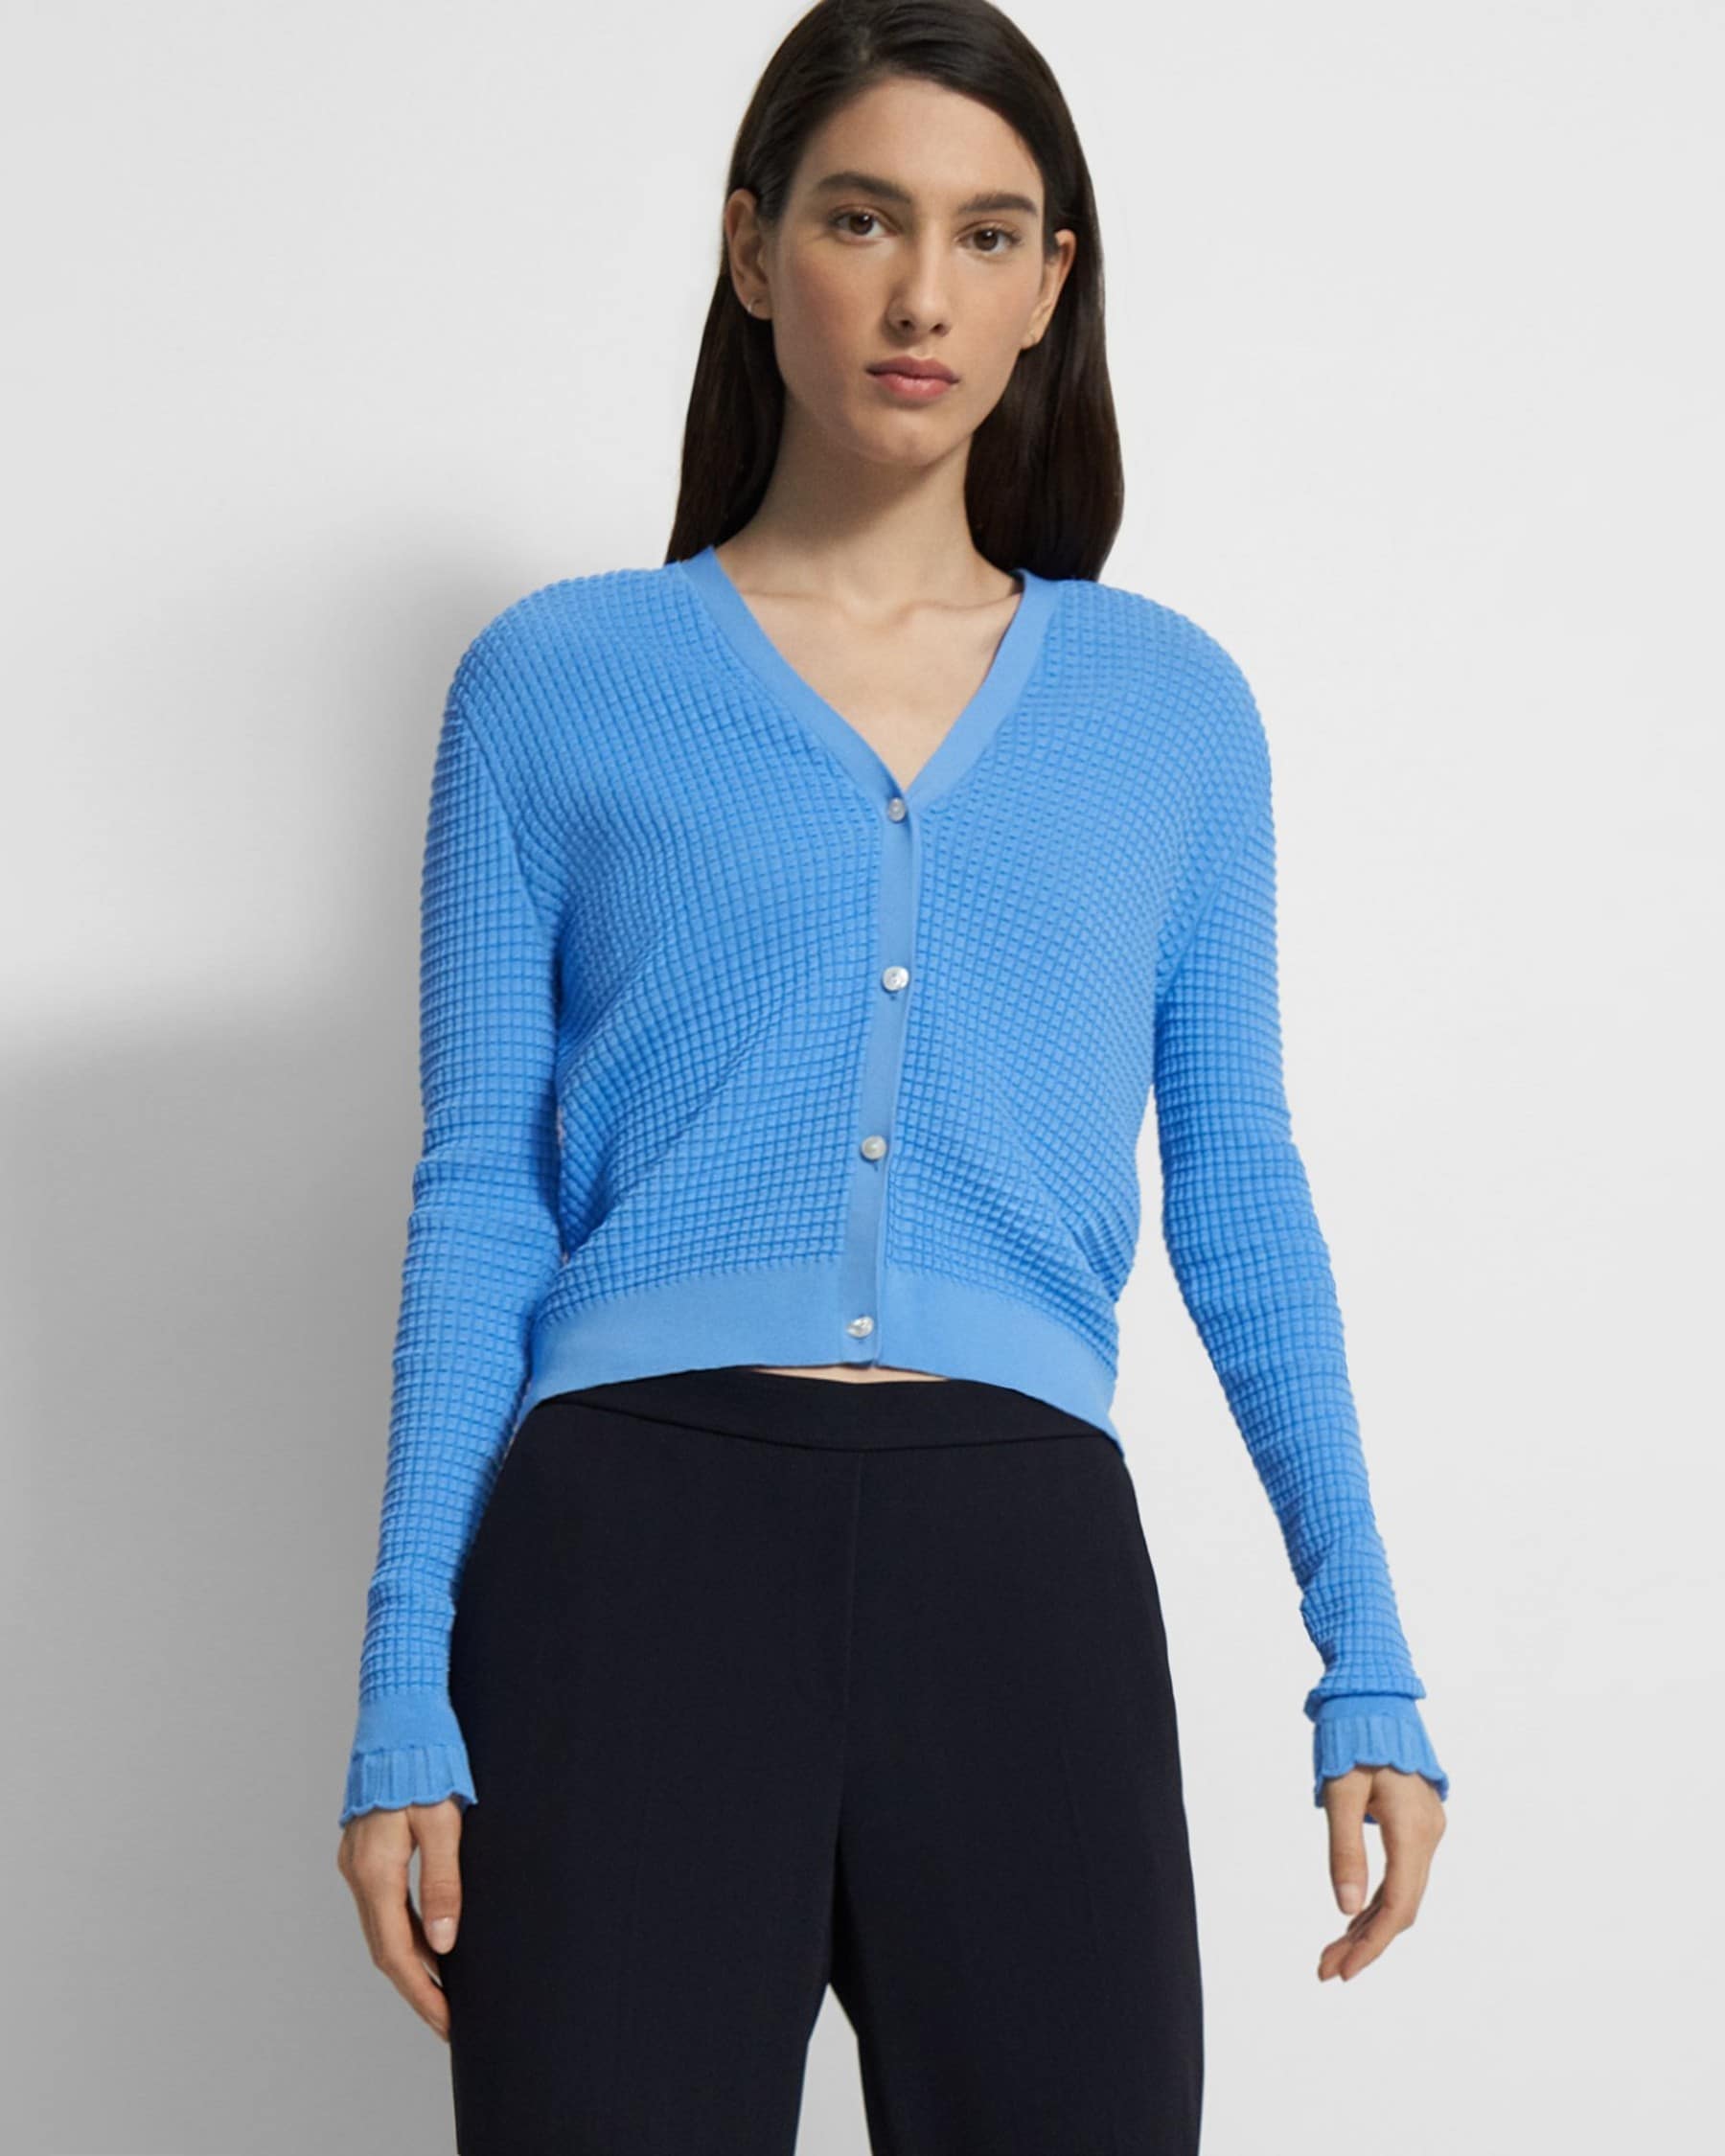 7. Theory V-Neck Cardigan in Cotton Blend Theory V-Neck Cardigan in Cotton Blend